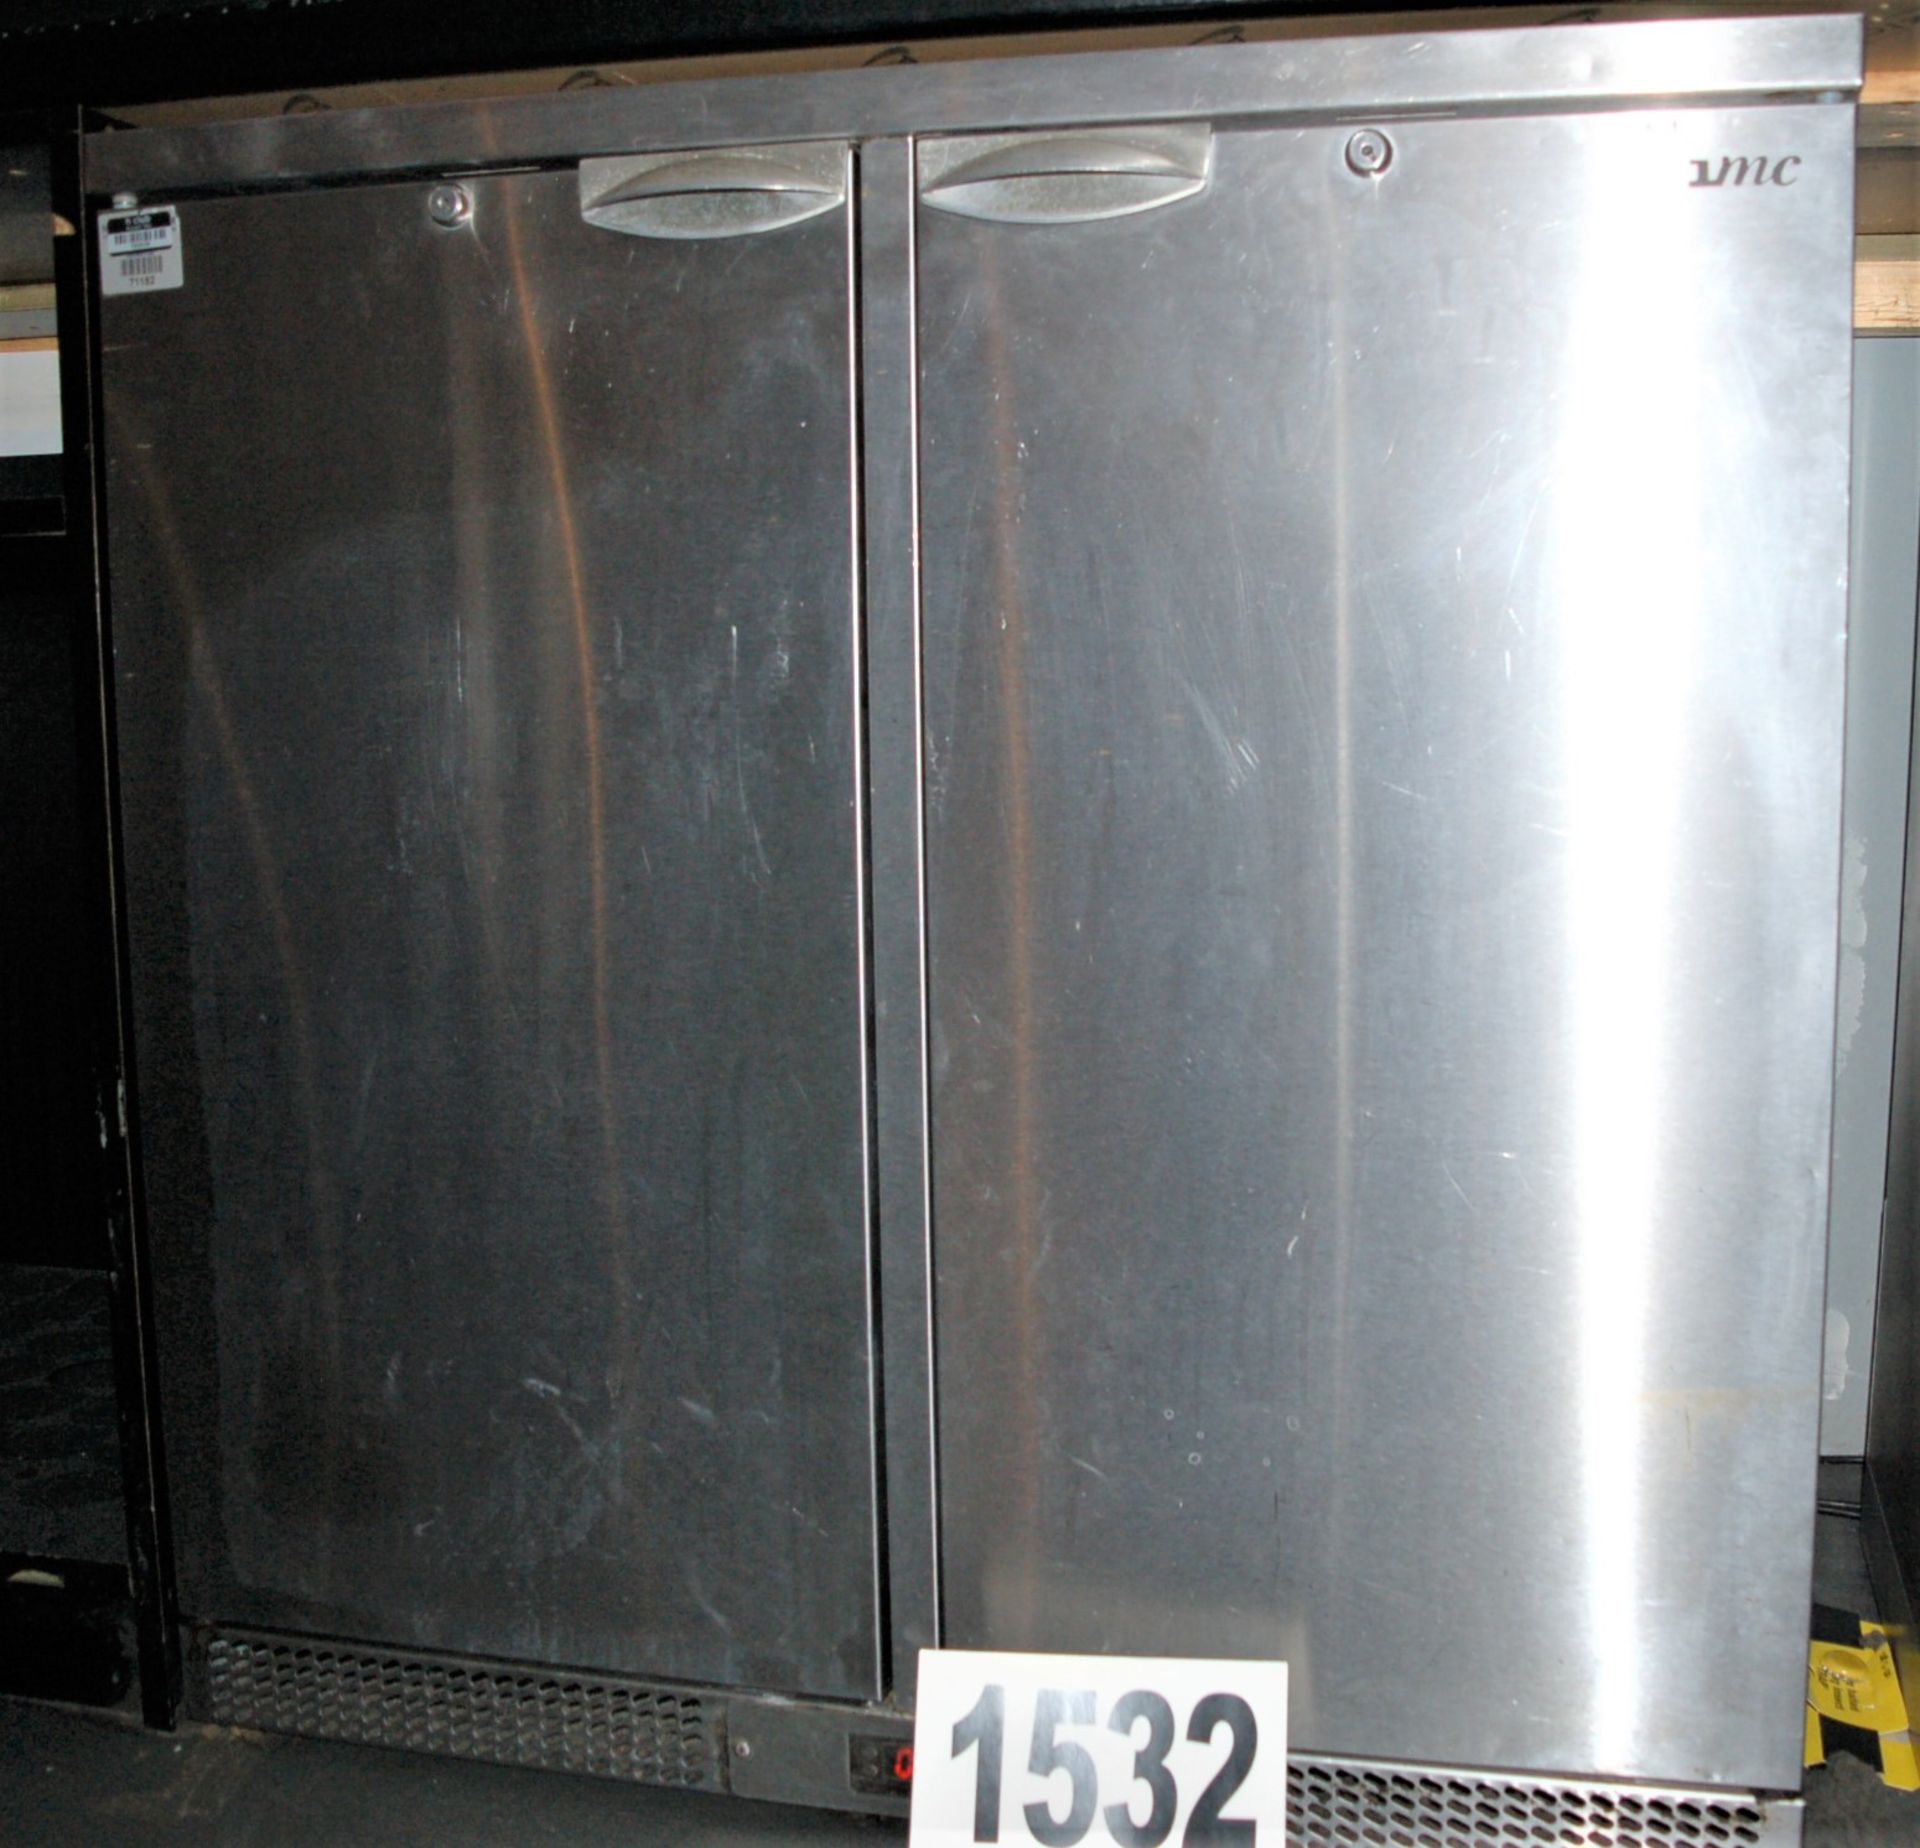 An IMC Mistral Model M190 Commercial Double Door Under Counter Drinks Chiller Cabinet